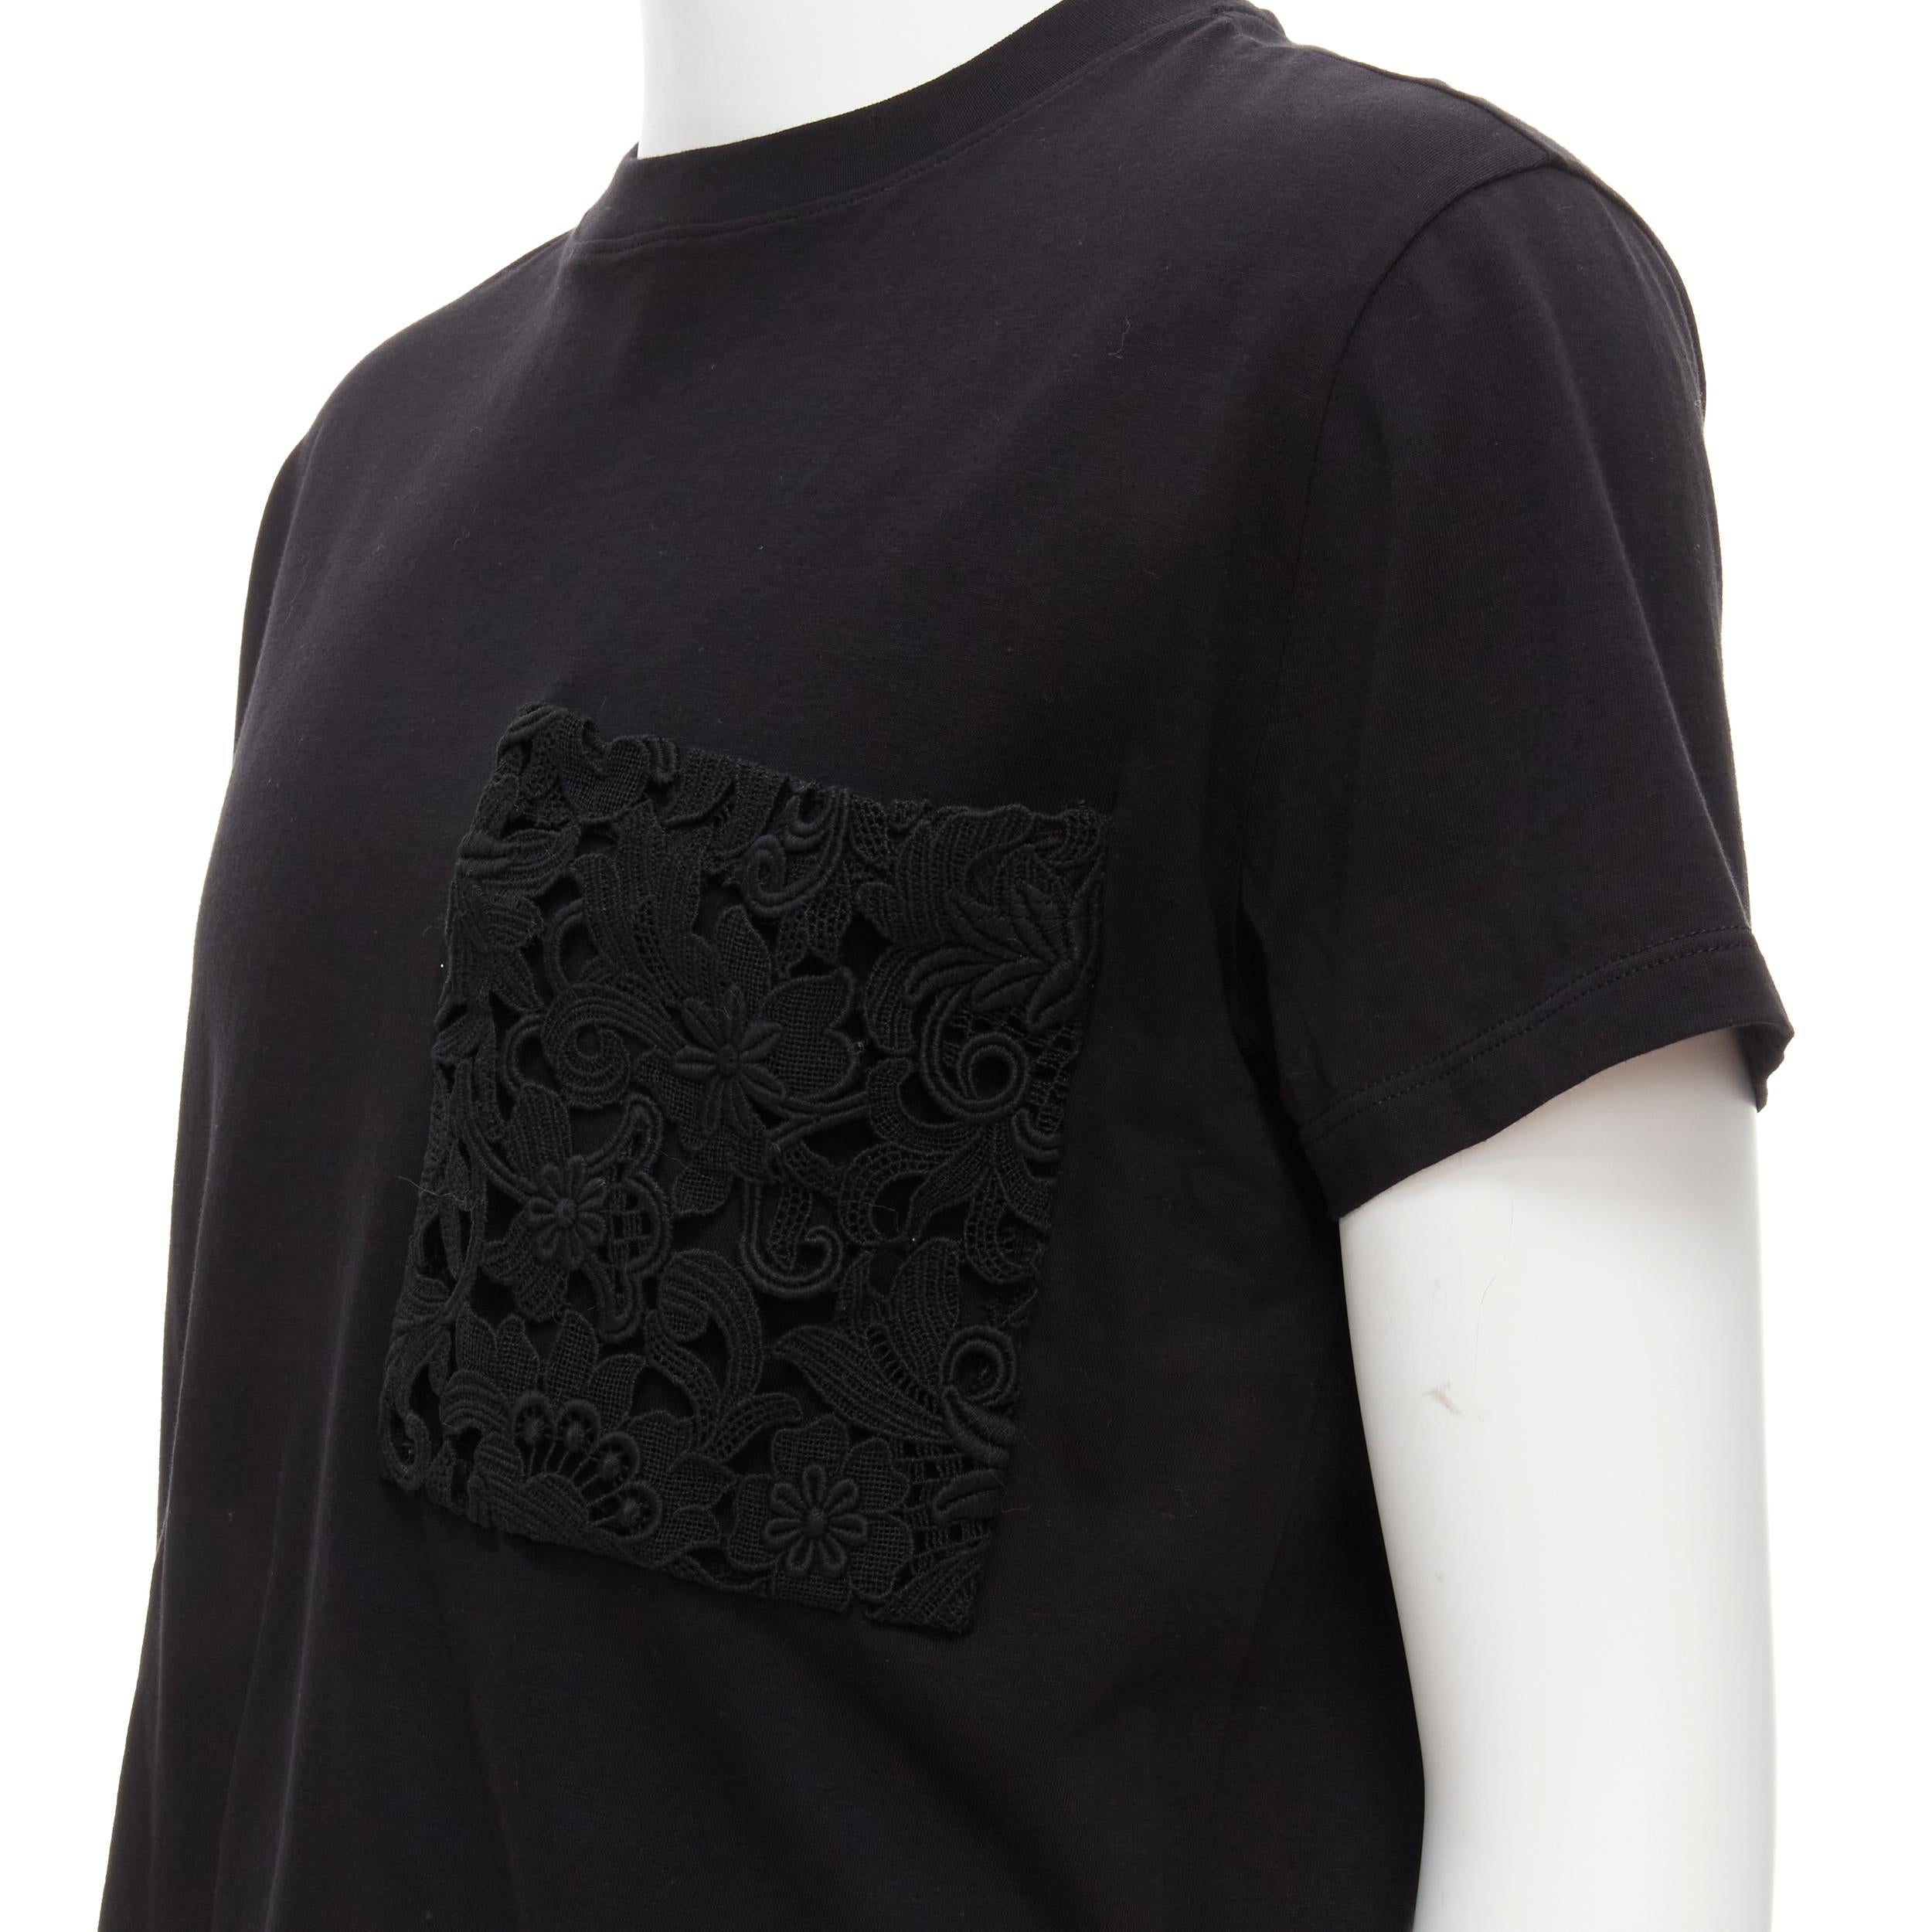 VALENTINO floral lace breast pocket white logo black cotton tshirt S 
Reference: CRTI/A00725 
Brand: Valentino 
Material: Cotton 
Color: Black 
Pattern: Lace 
Extra Detail: Lace patch breast pocket. 
Made in: Italy 

CONDITION: 
Condition: